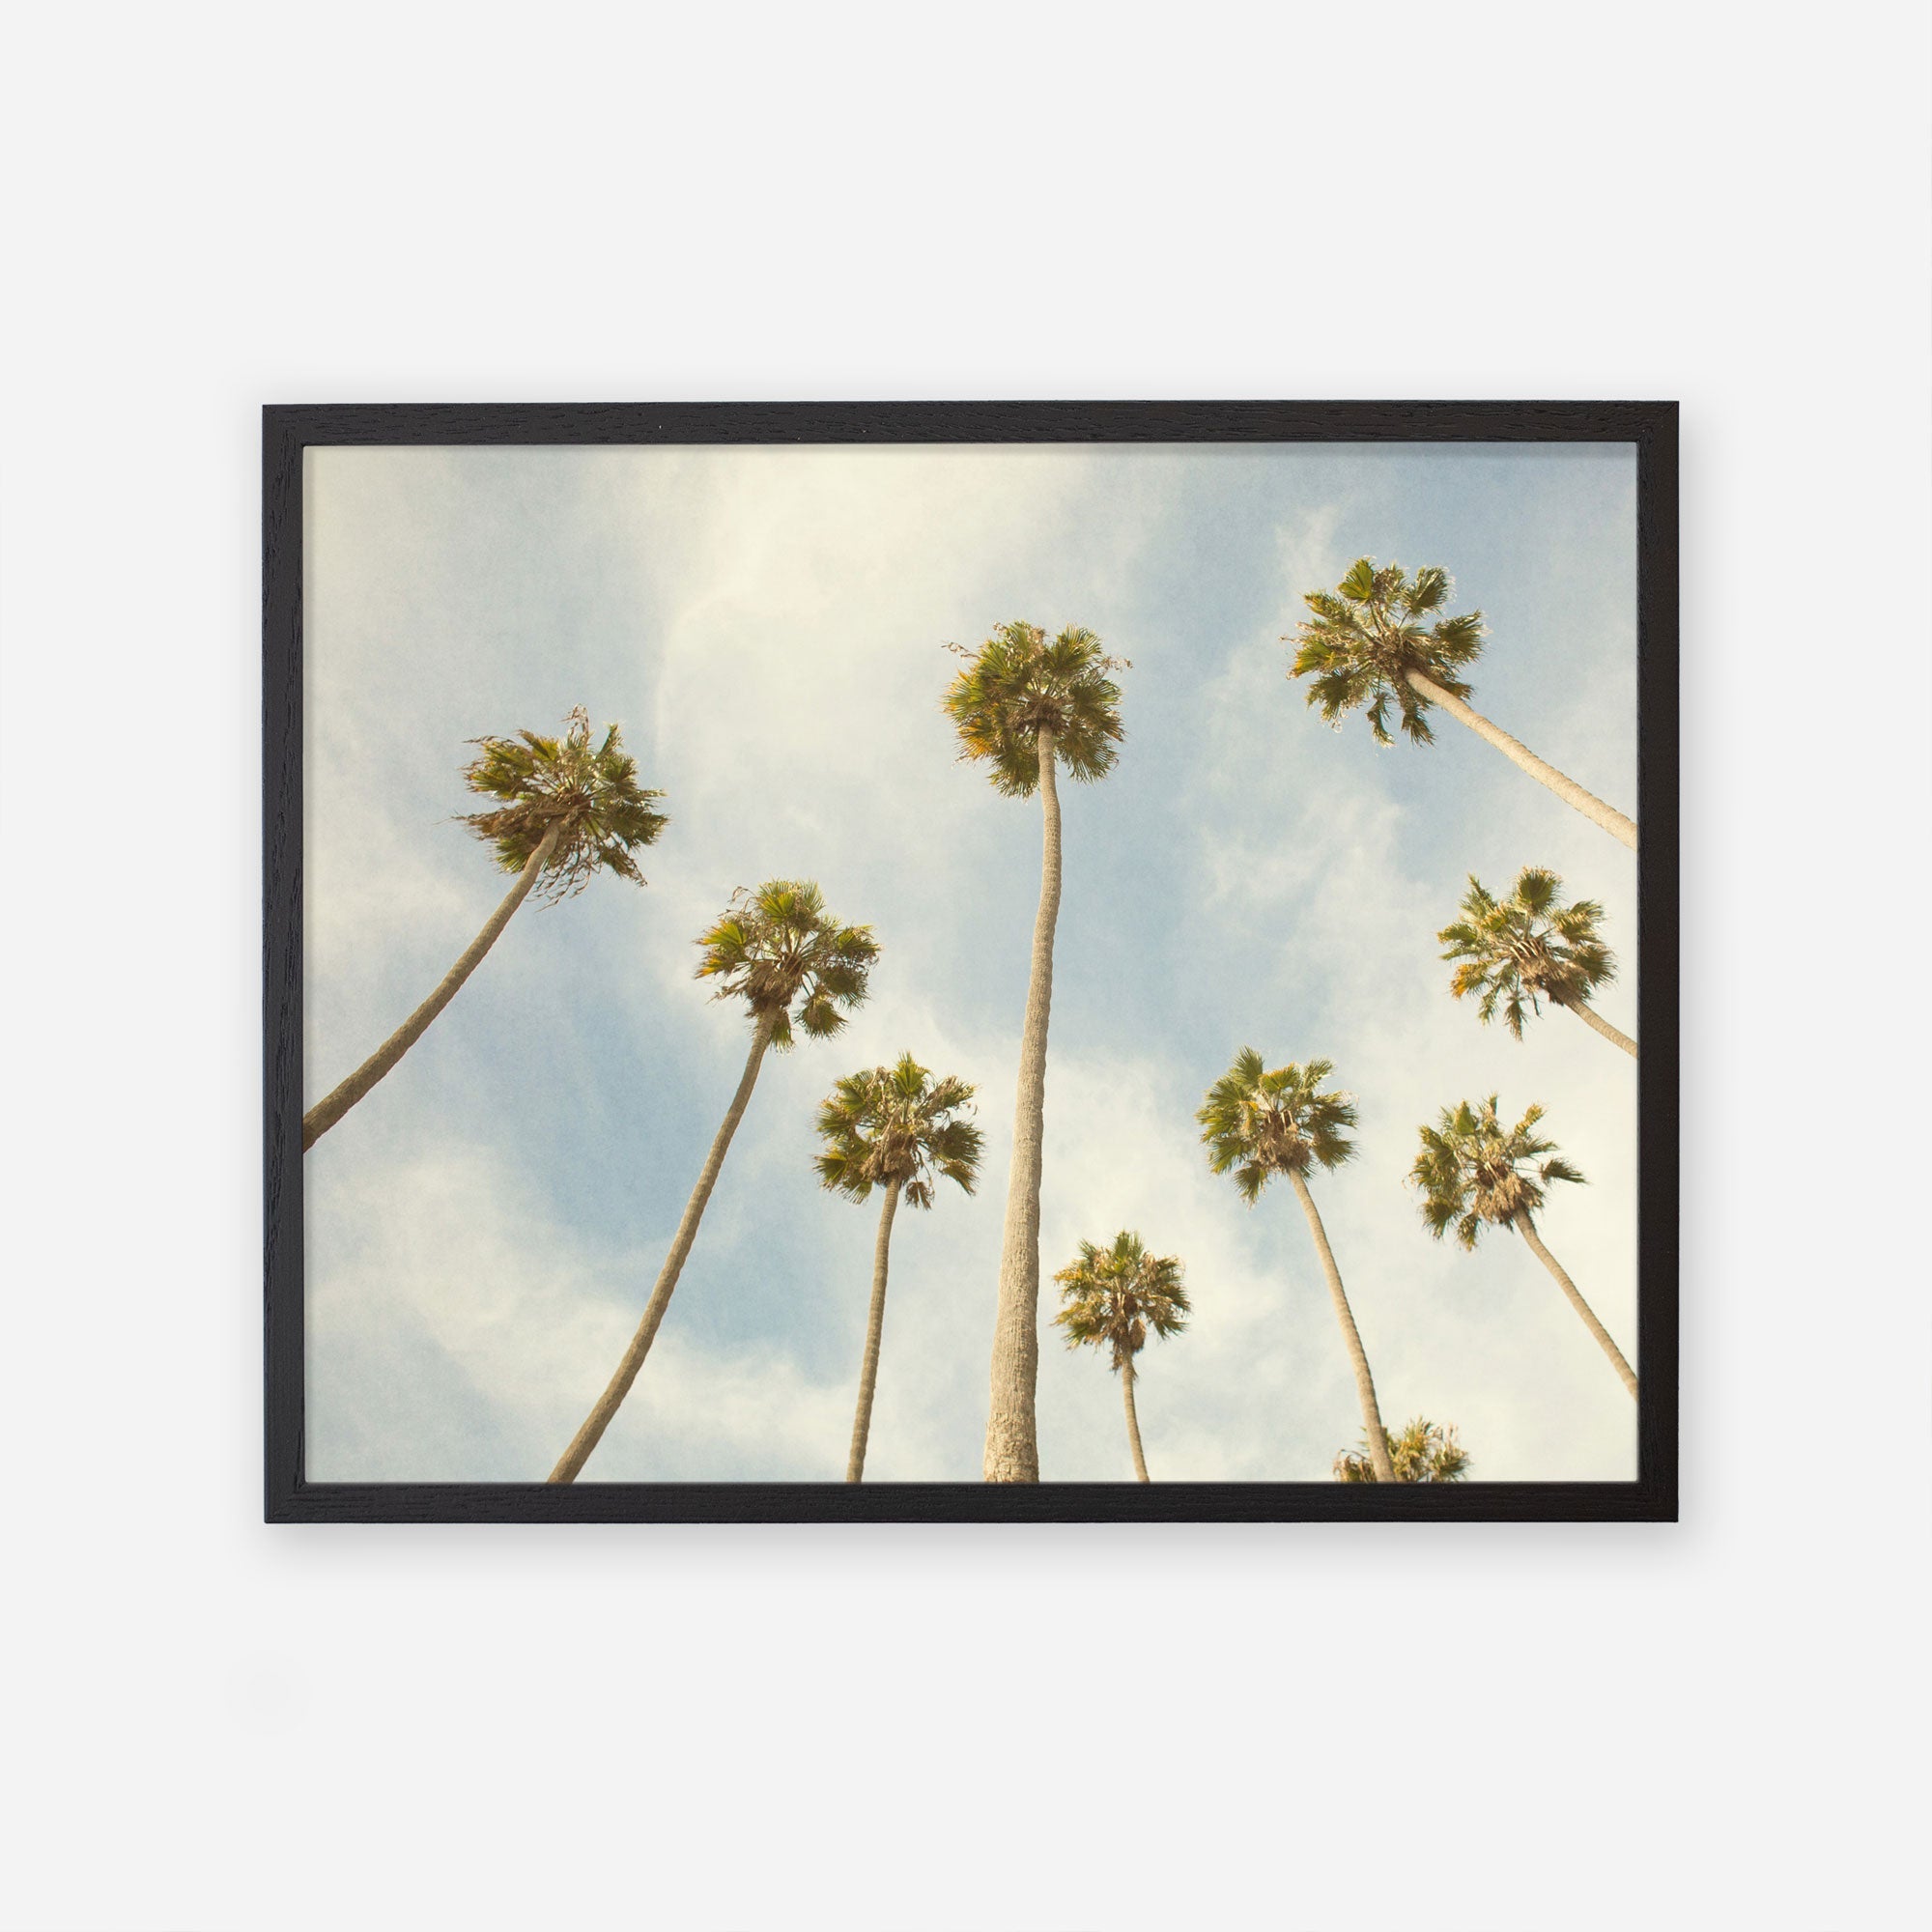 Framed photograph of tall California palm trees against a clear sky, viewed from below, emphasizing their long trunks and feathery tops - Offley Green&#39;s Palm Tree Print, California Beach Scene &#39;Reach for the Palms&#39;.